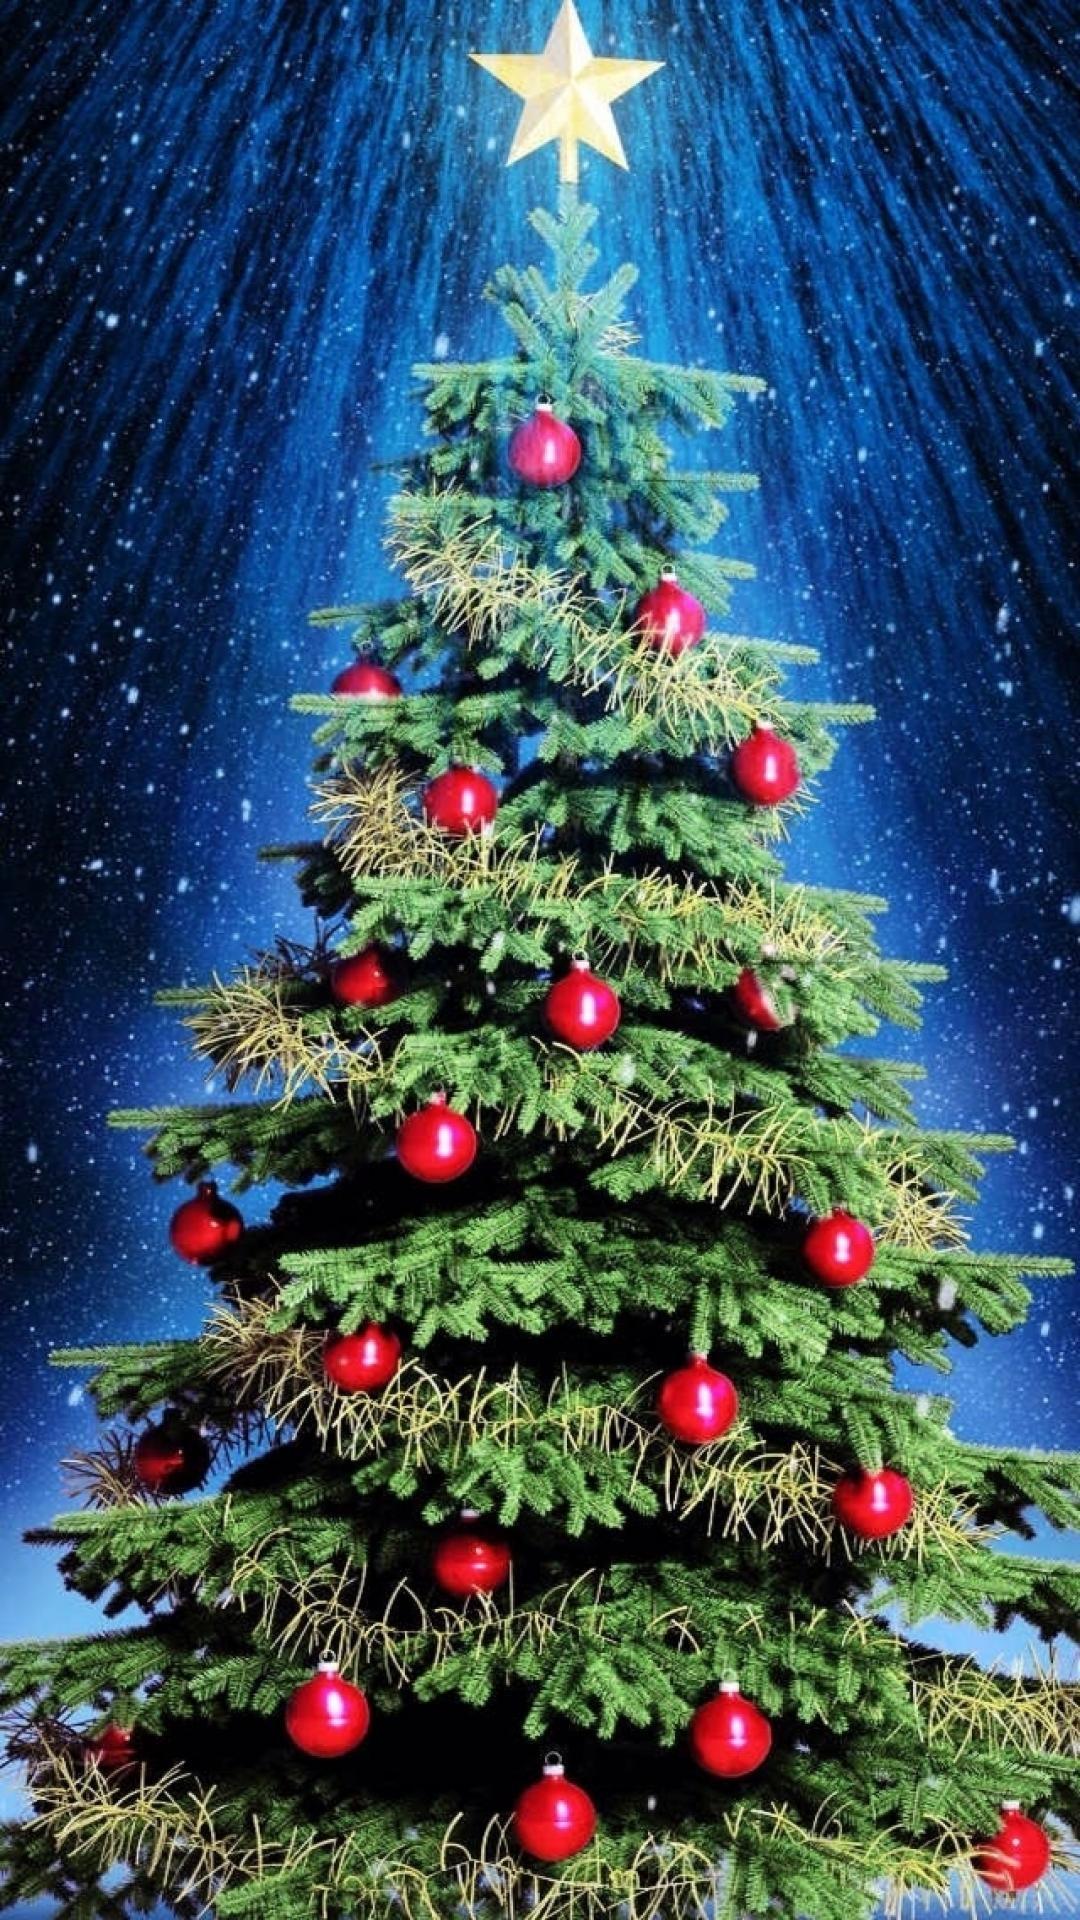 iPhone 6 Wallpaper. Live christmas trees, Christmas tree painting, Christmas wallpaper